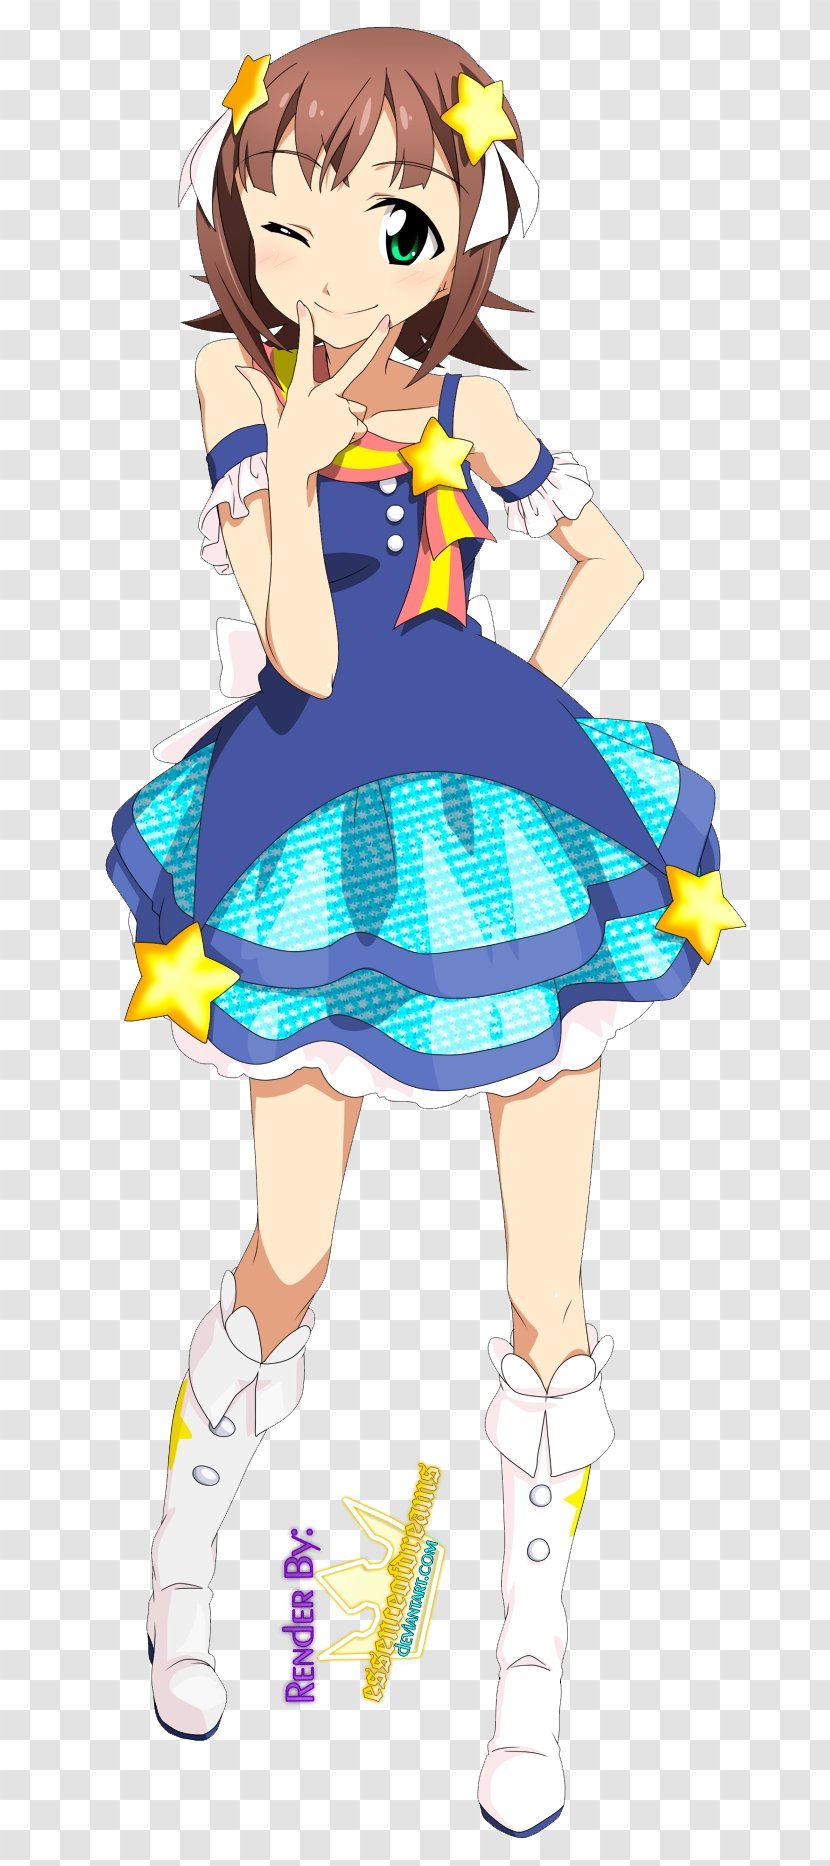 Haruka Amami The Idolmaster Rendering THE IDOLM@STER - Tree Transparent PNG